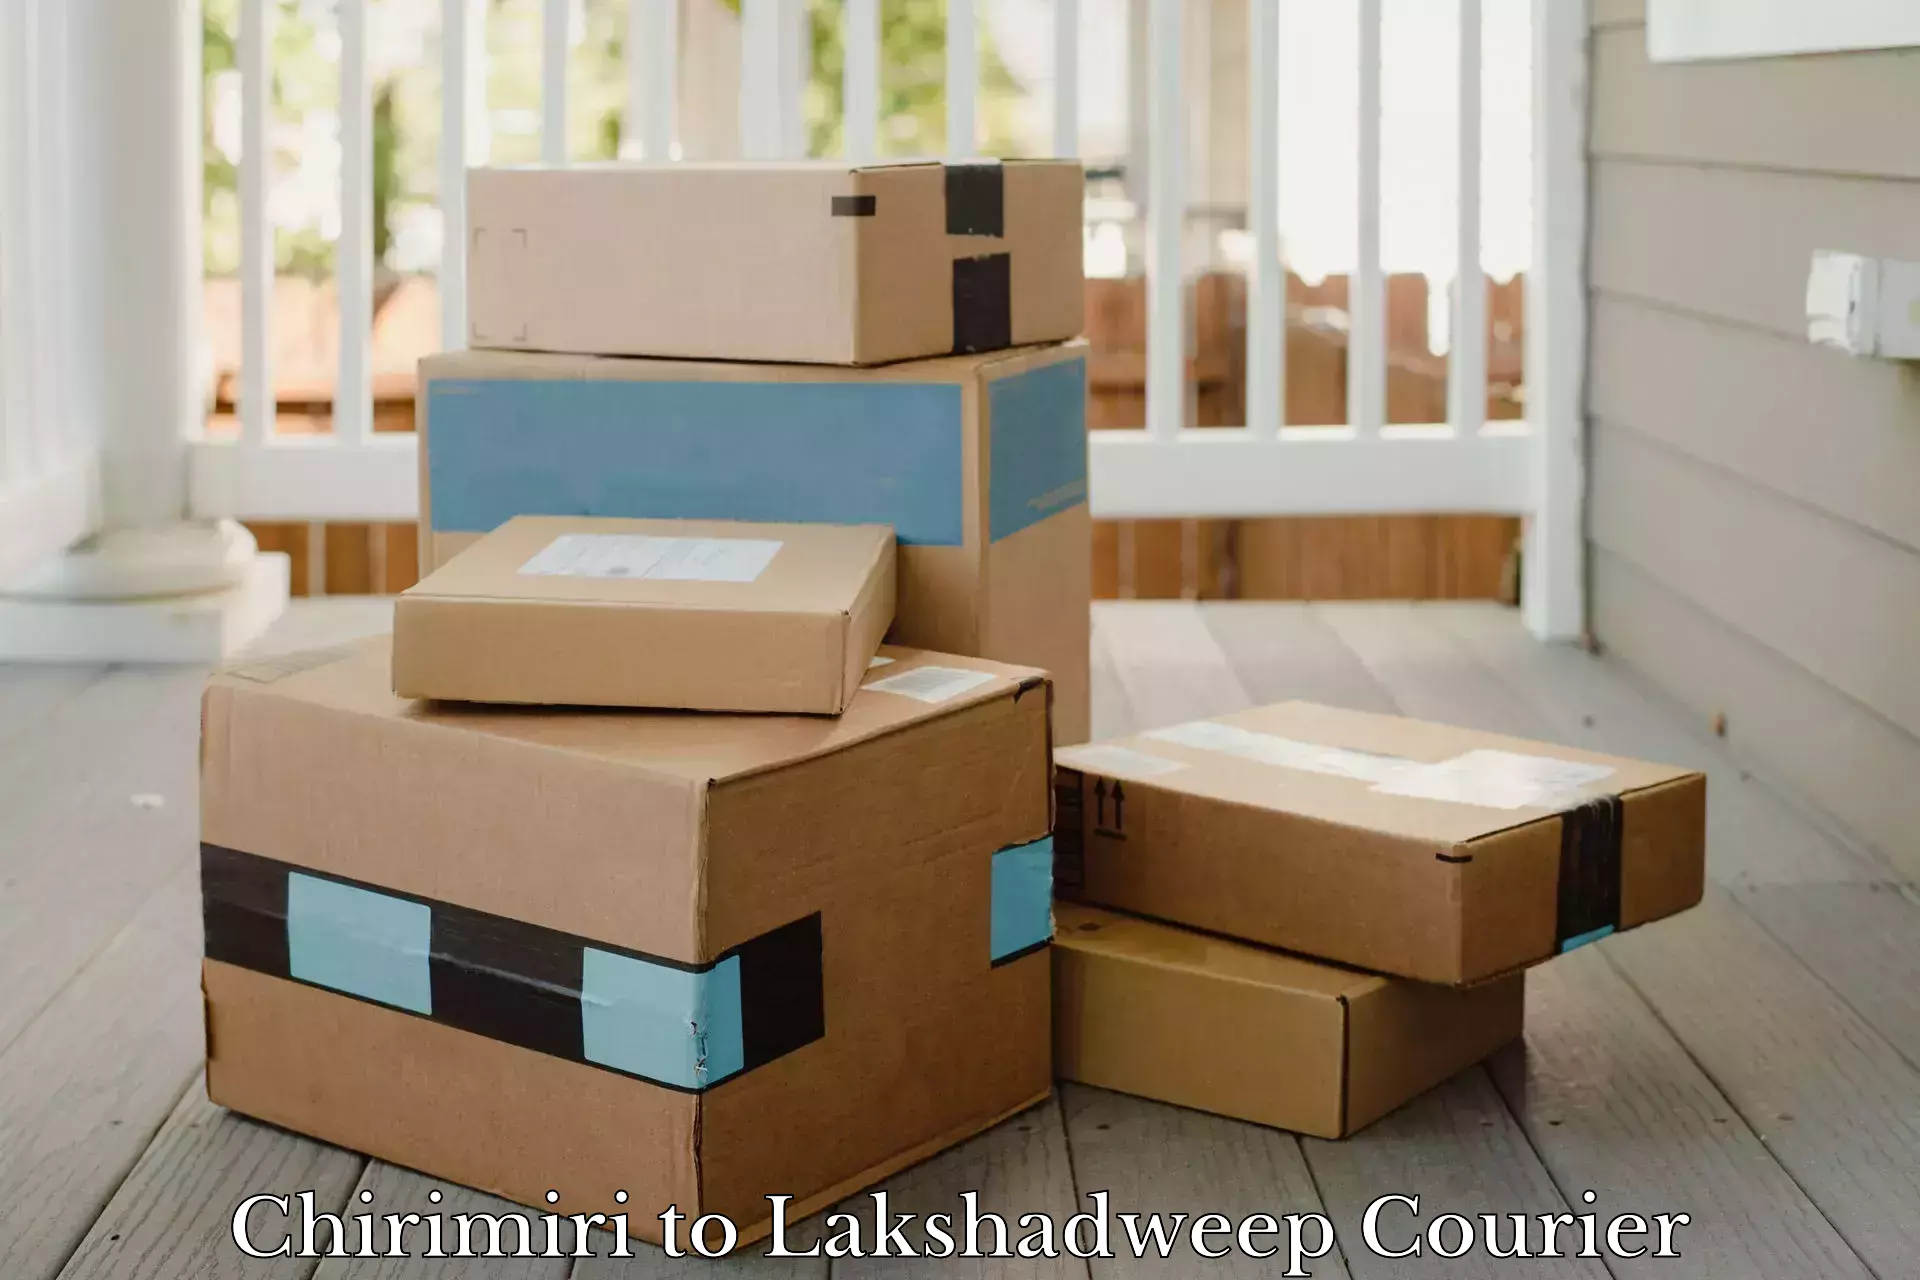 Customer-oriented courier services Chirimiri to Lakshadweep